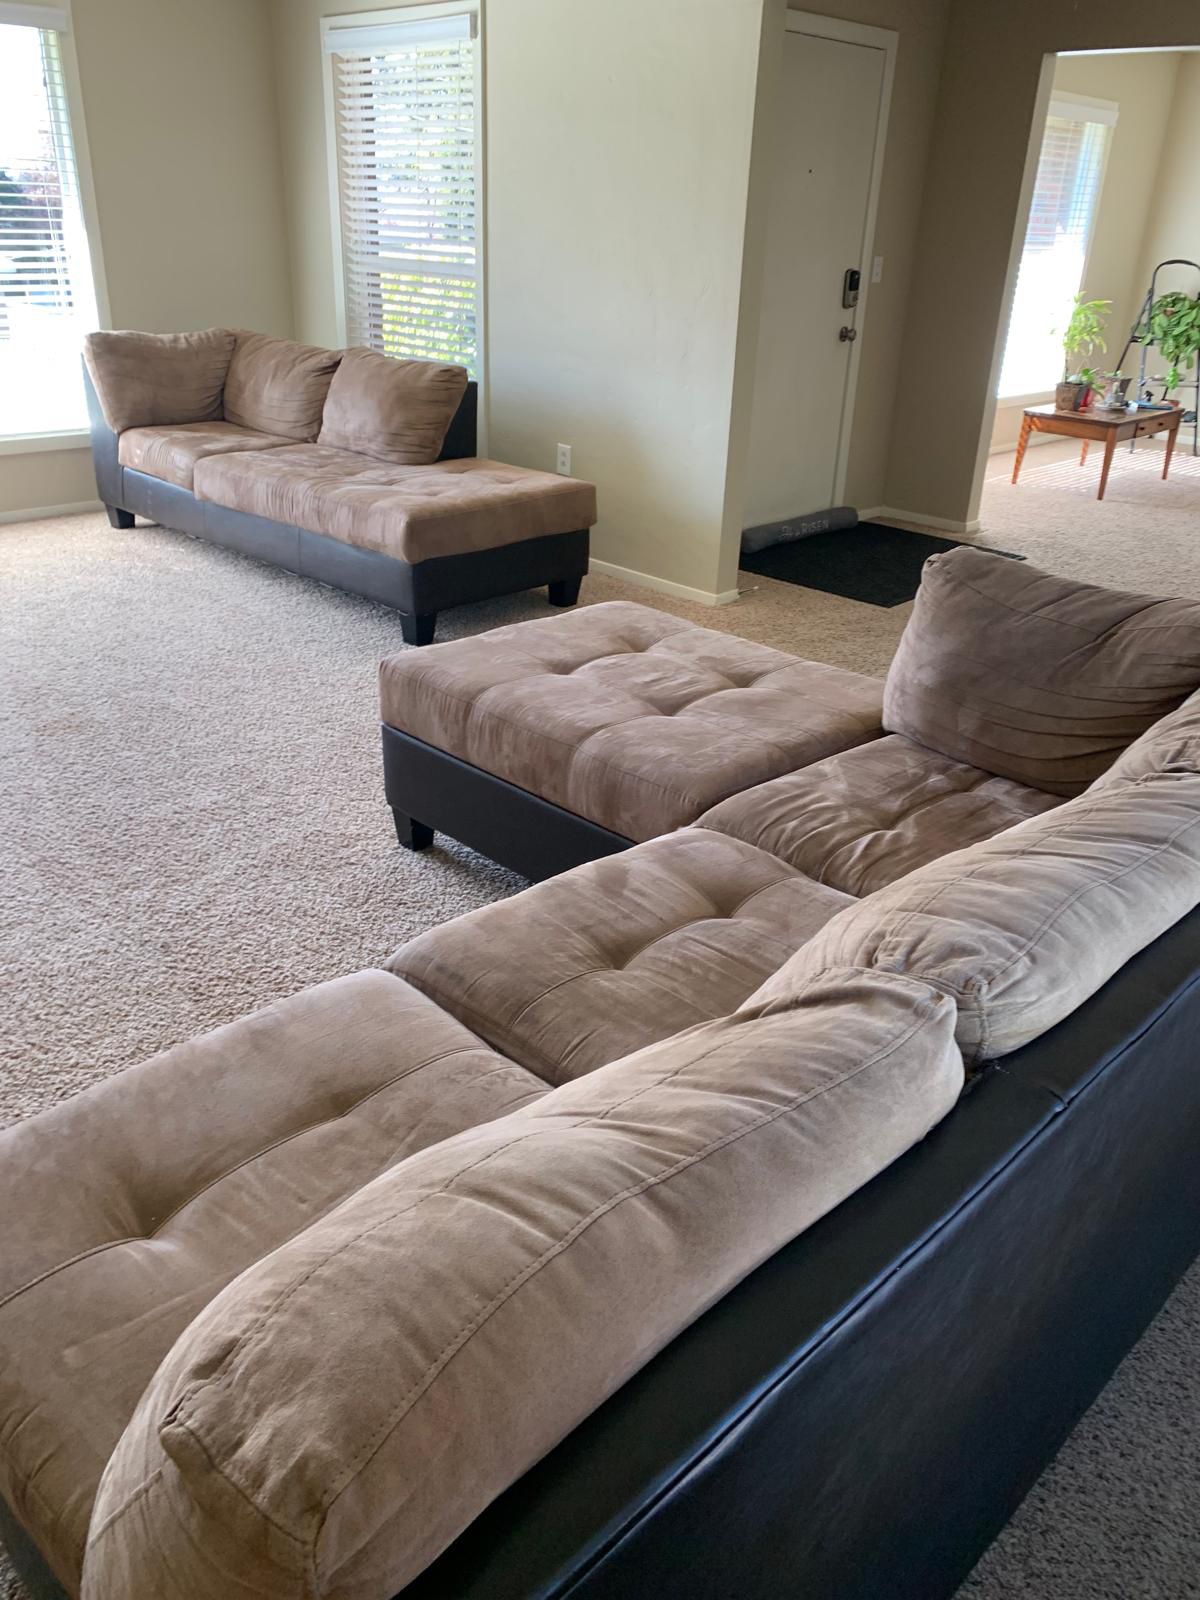 Sectional couch (3 pieces)